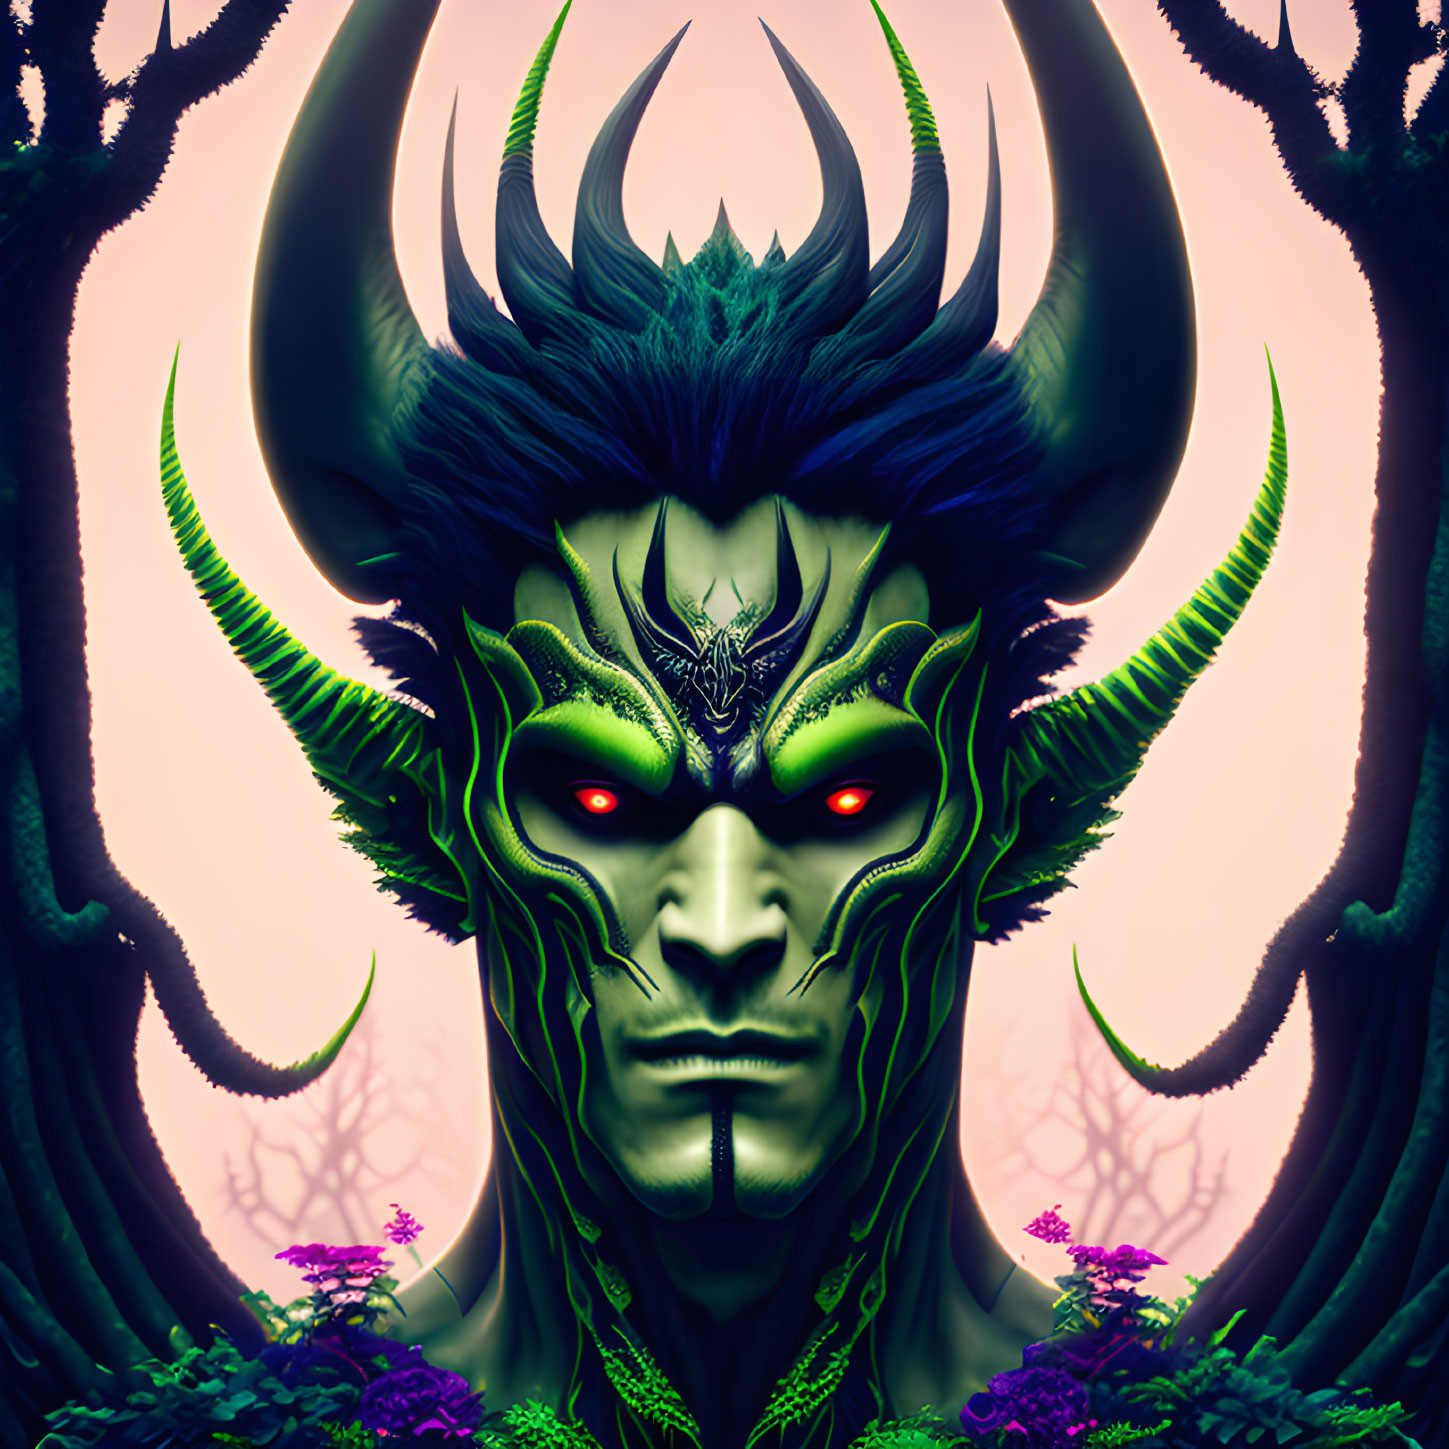 Symmetrical digital artwork of green-skinned creature with red eyes and black horns in mystical purple forest